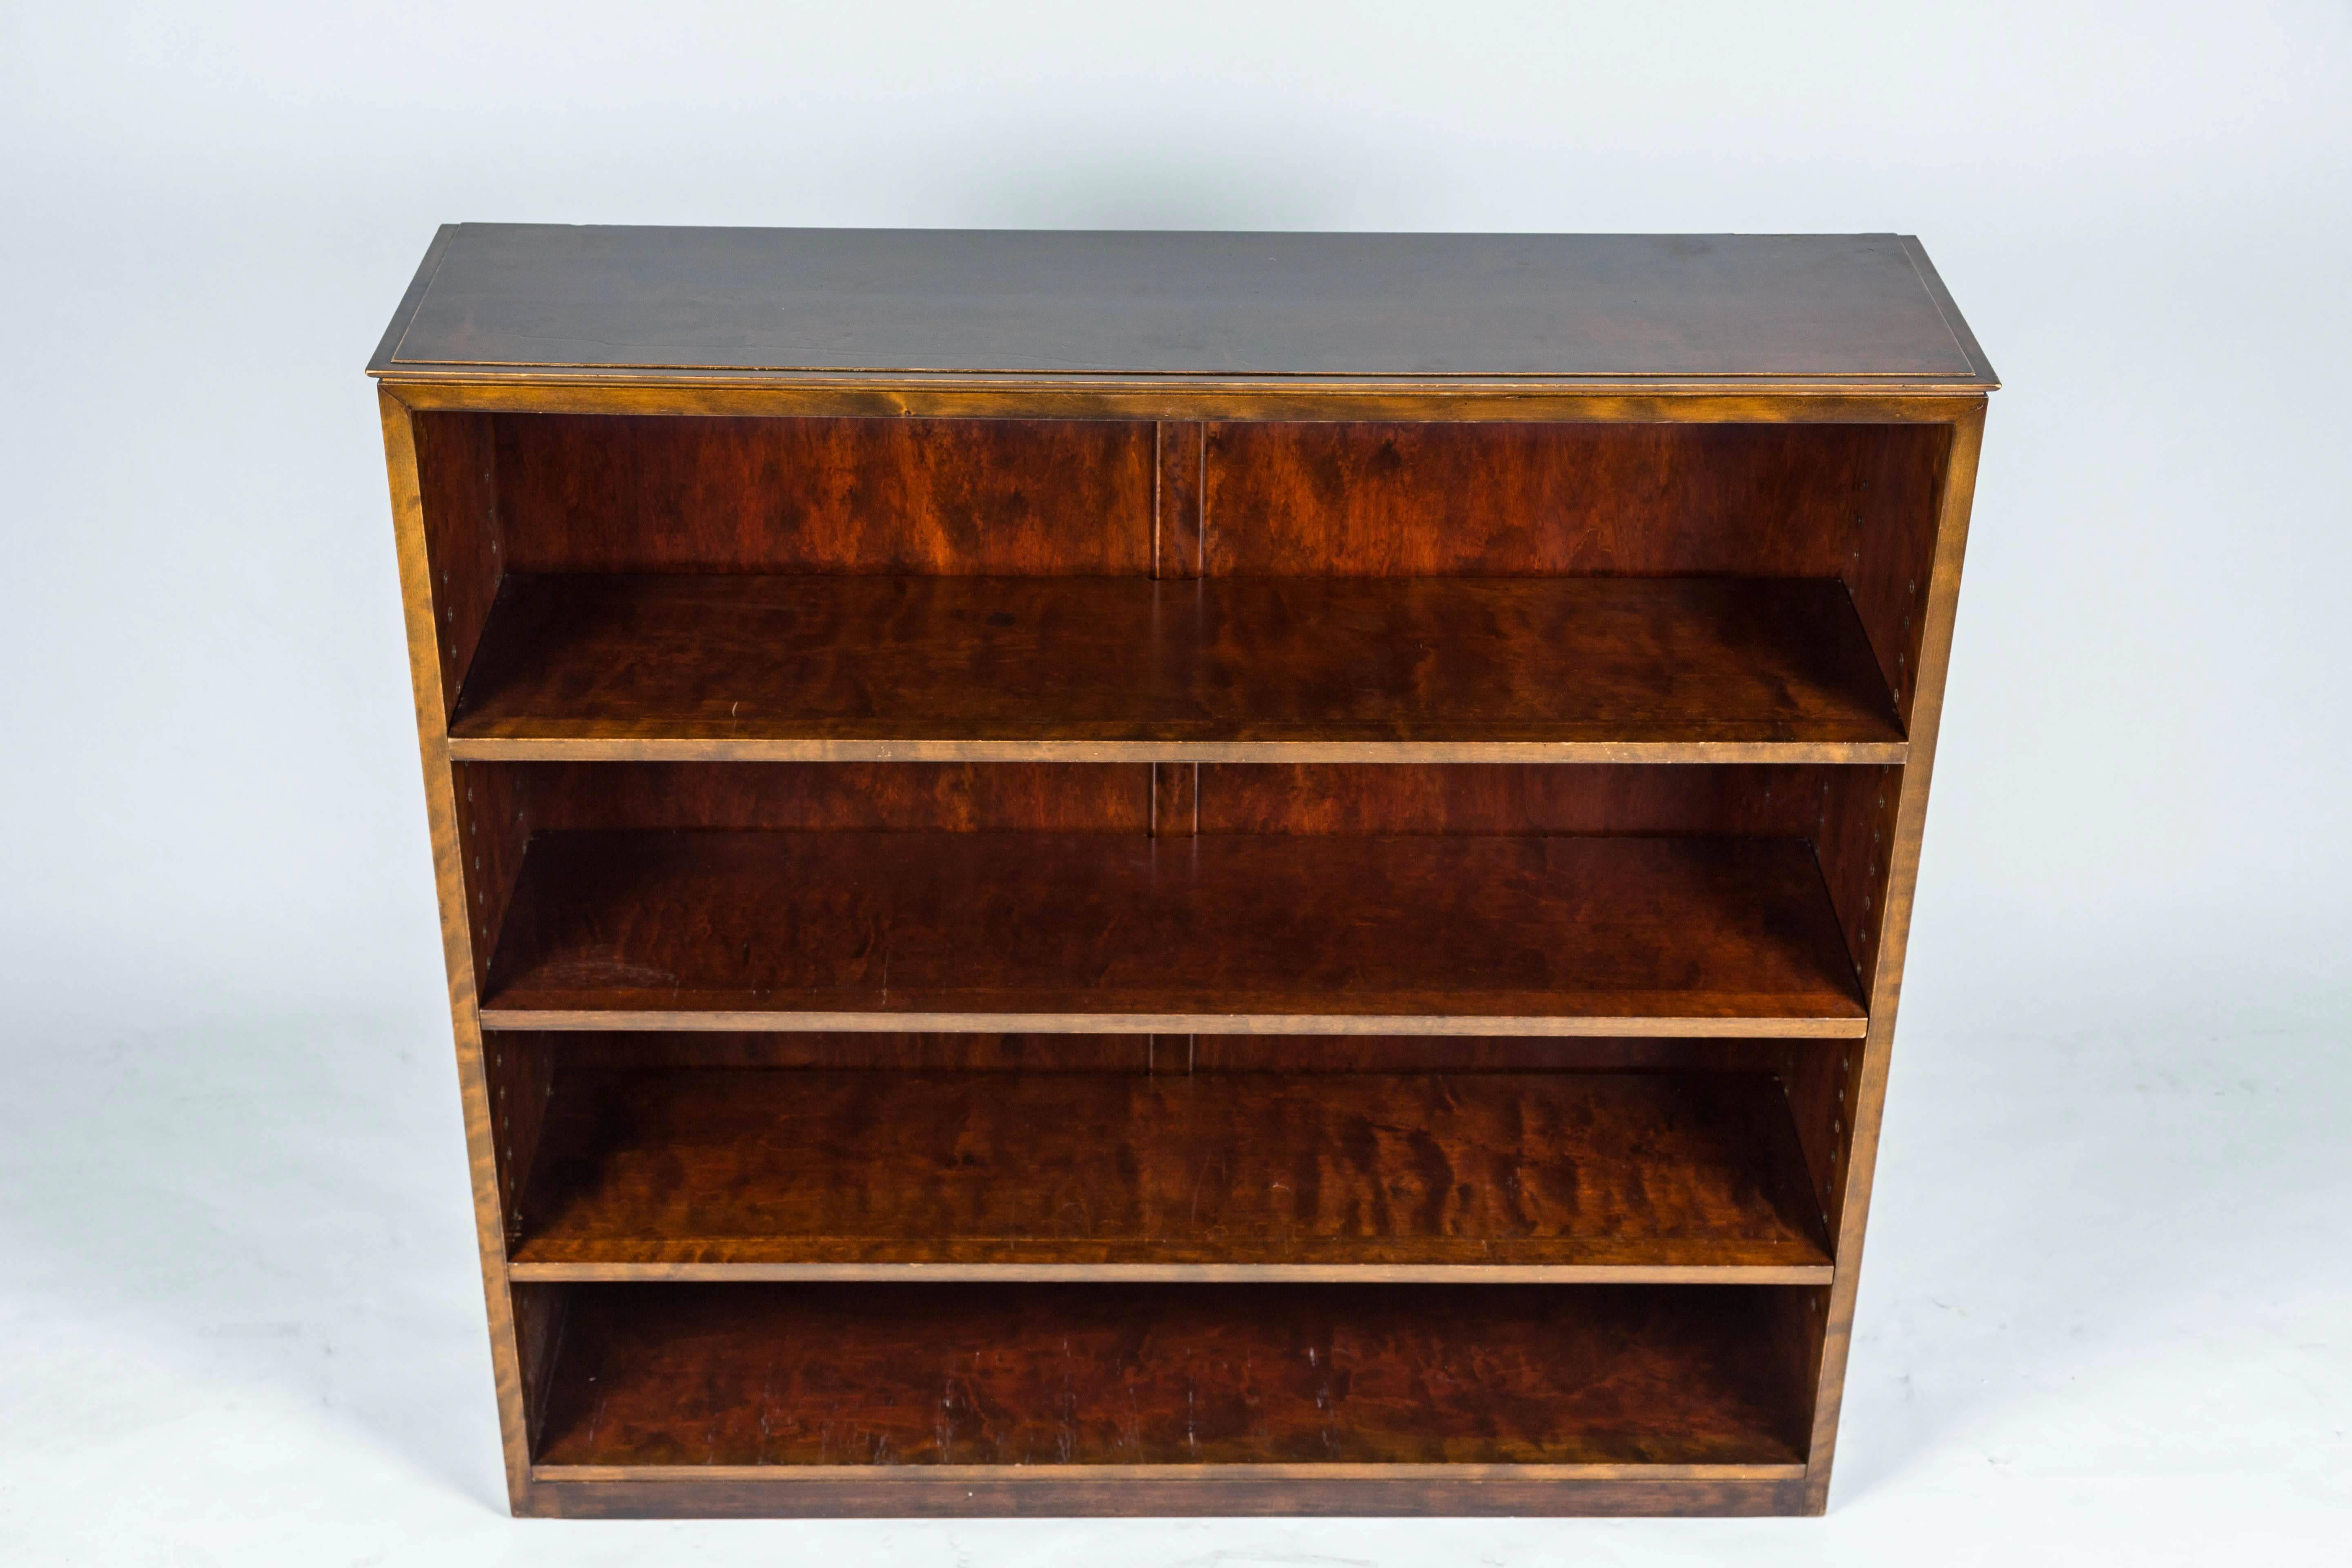 AXEL EINAR HJORTH BOOKSHELF, SWEDEN, c. 1930 In Excellent Condition For Sale In Los Angeles, CA